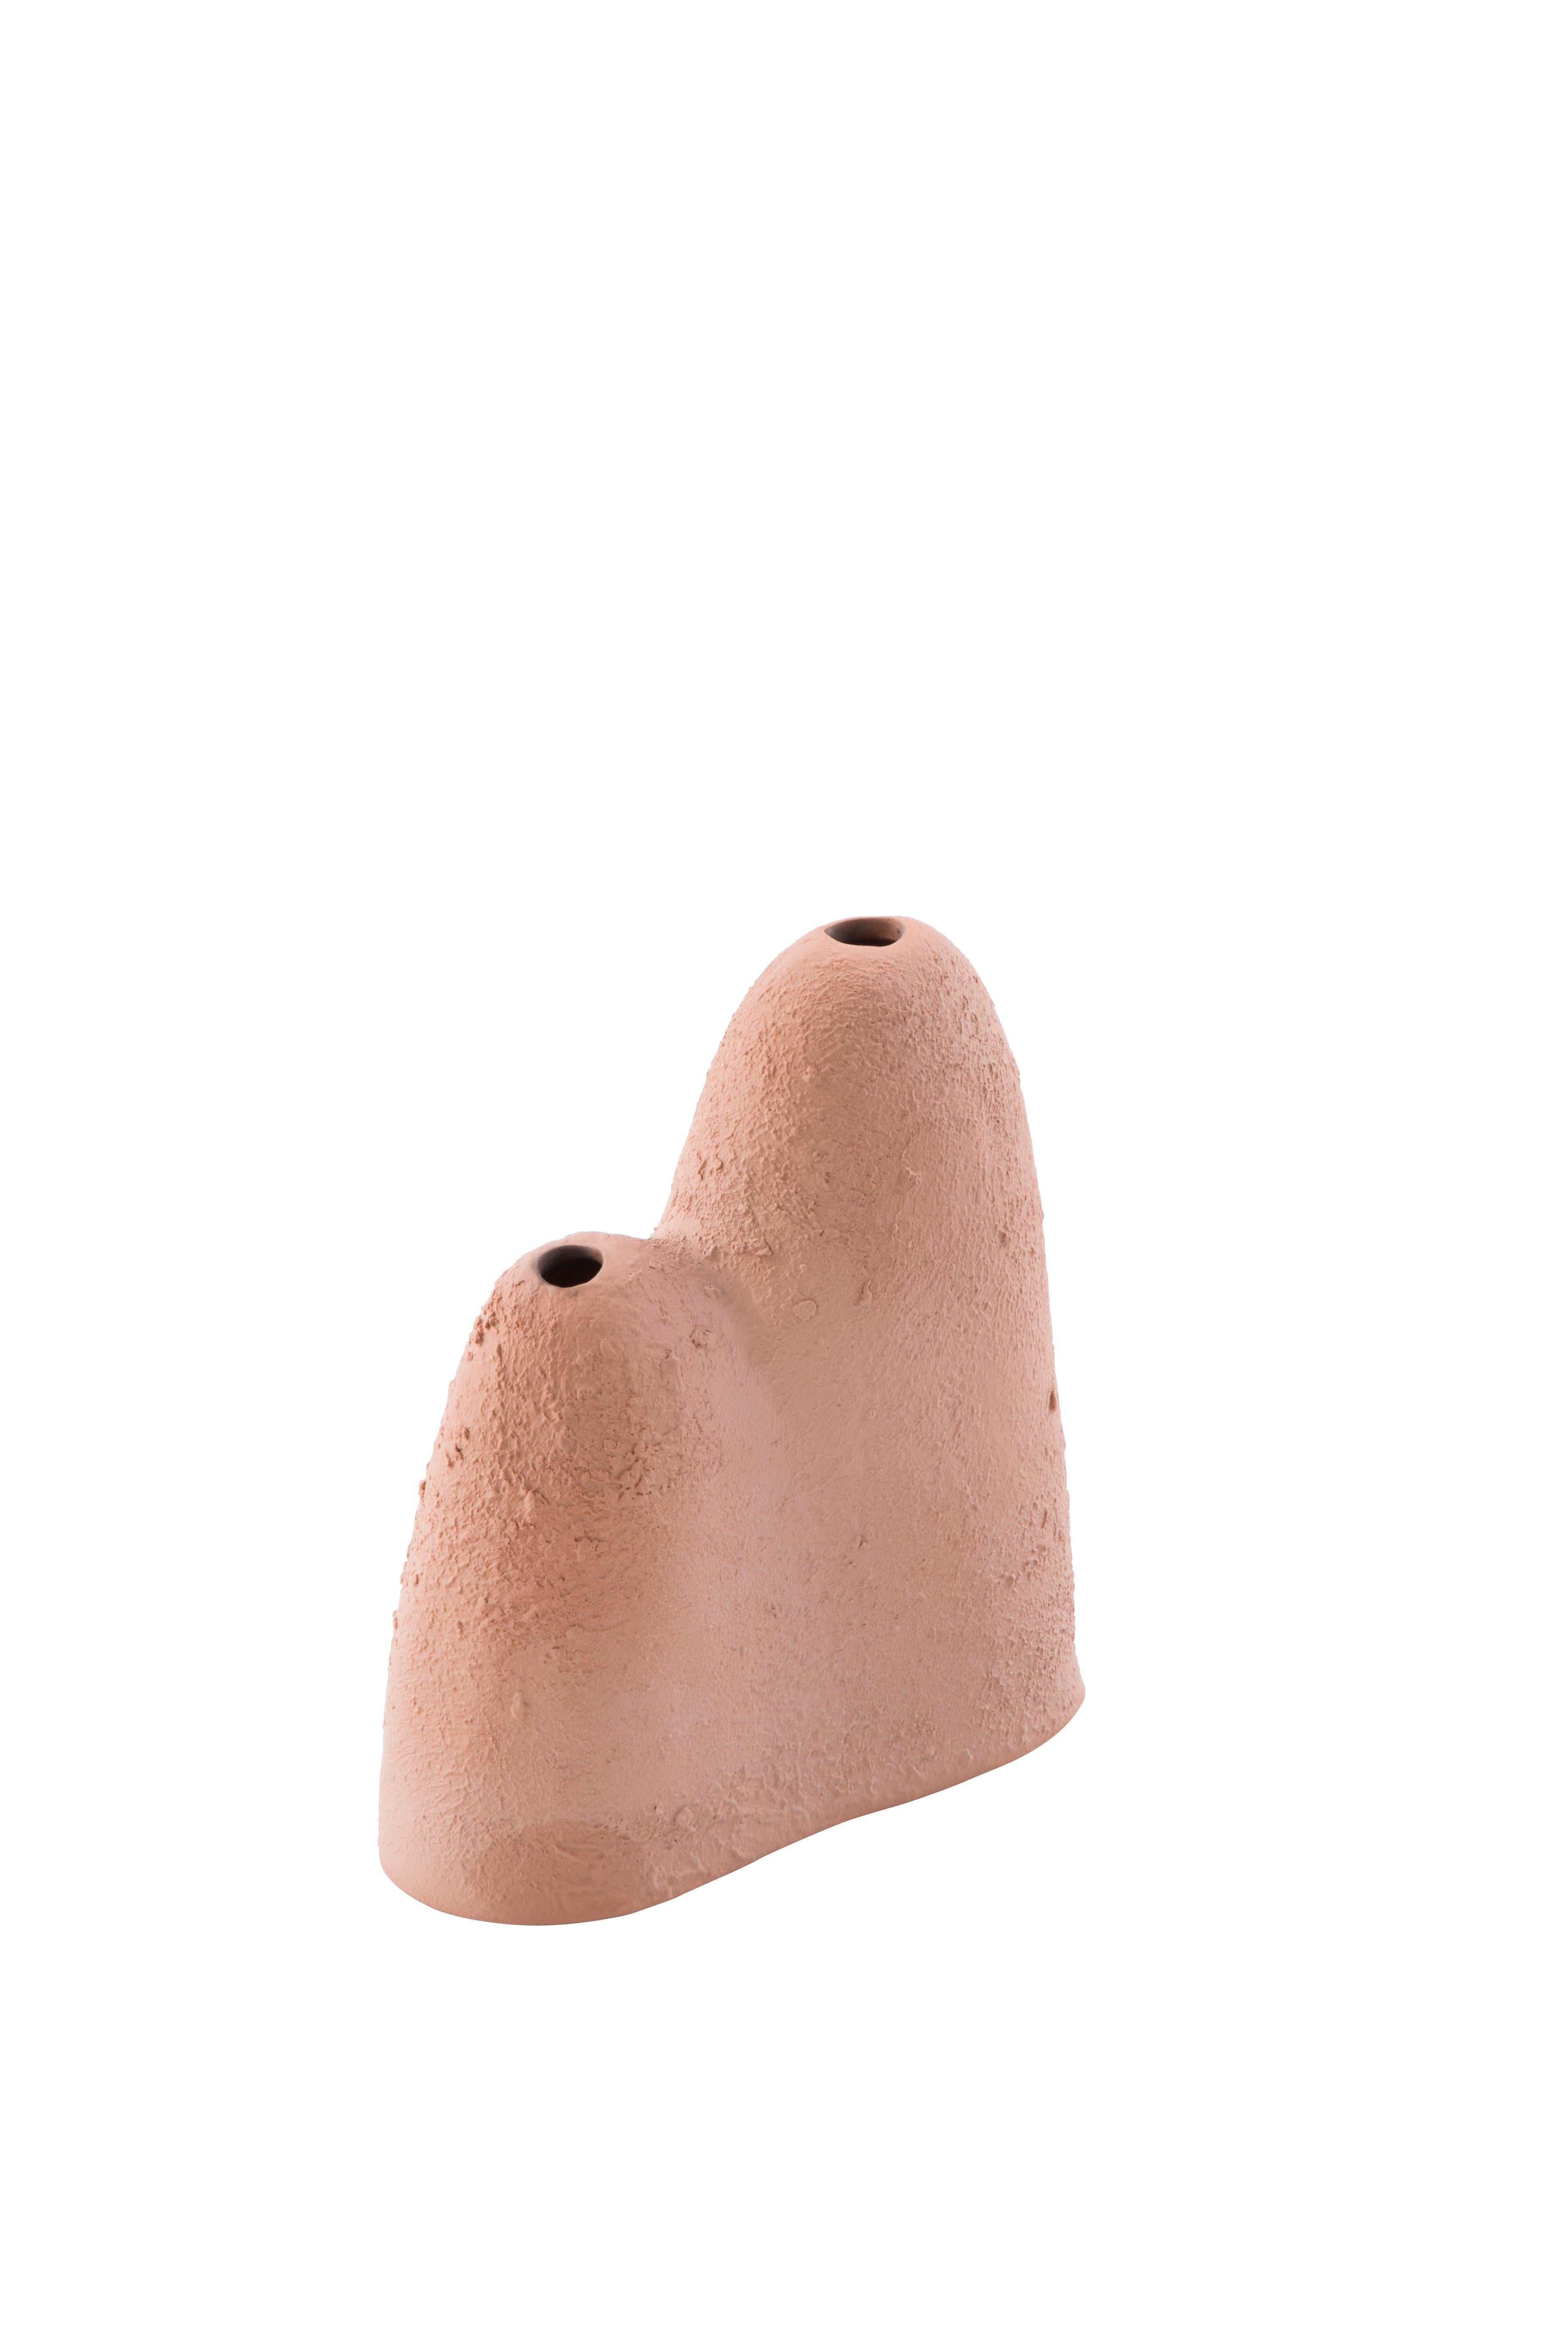 Post-Modern Mountain Small Terracotta Vase by Pulpo For Sale